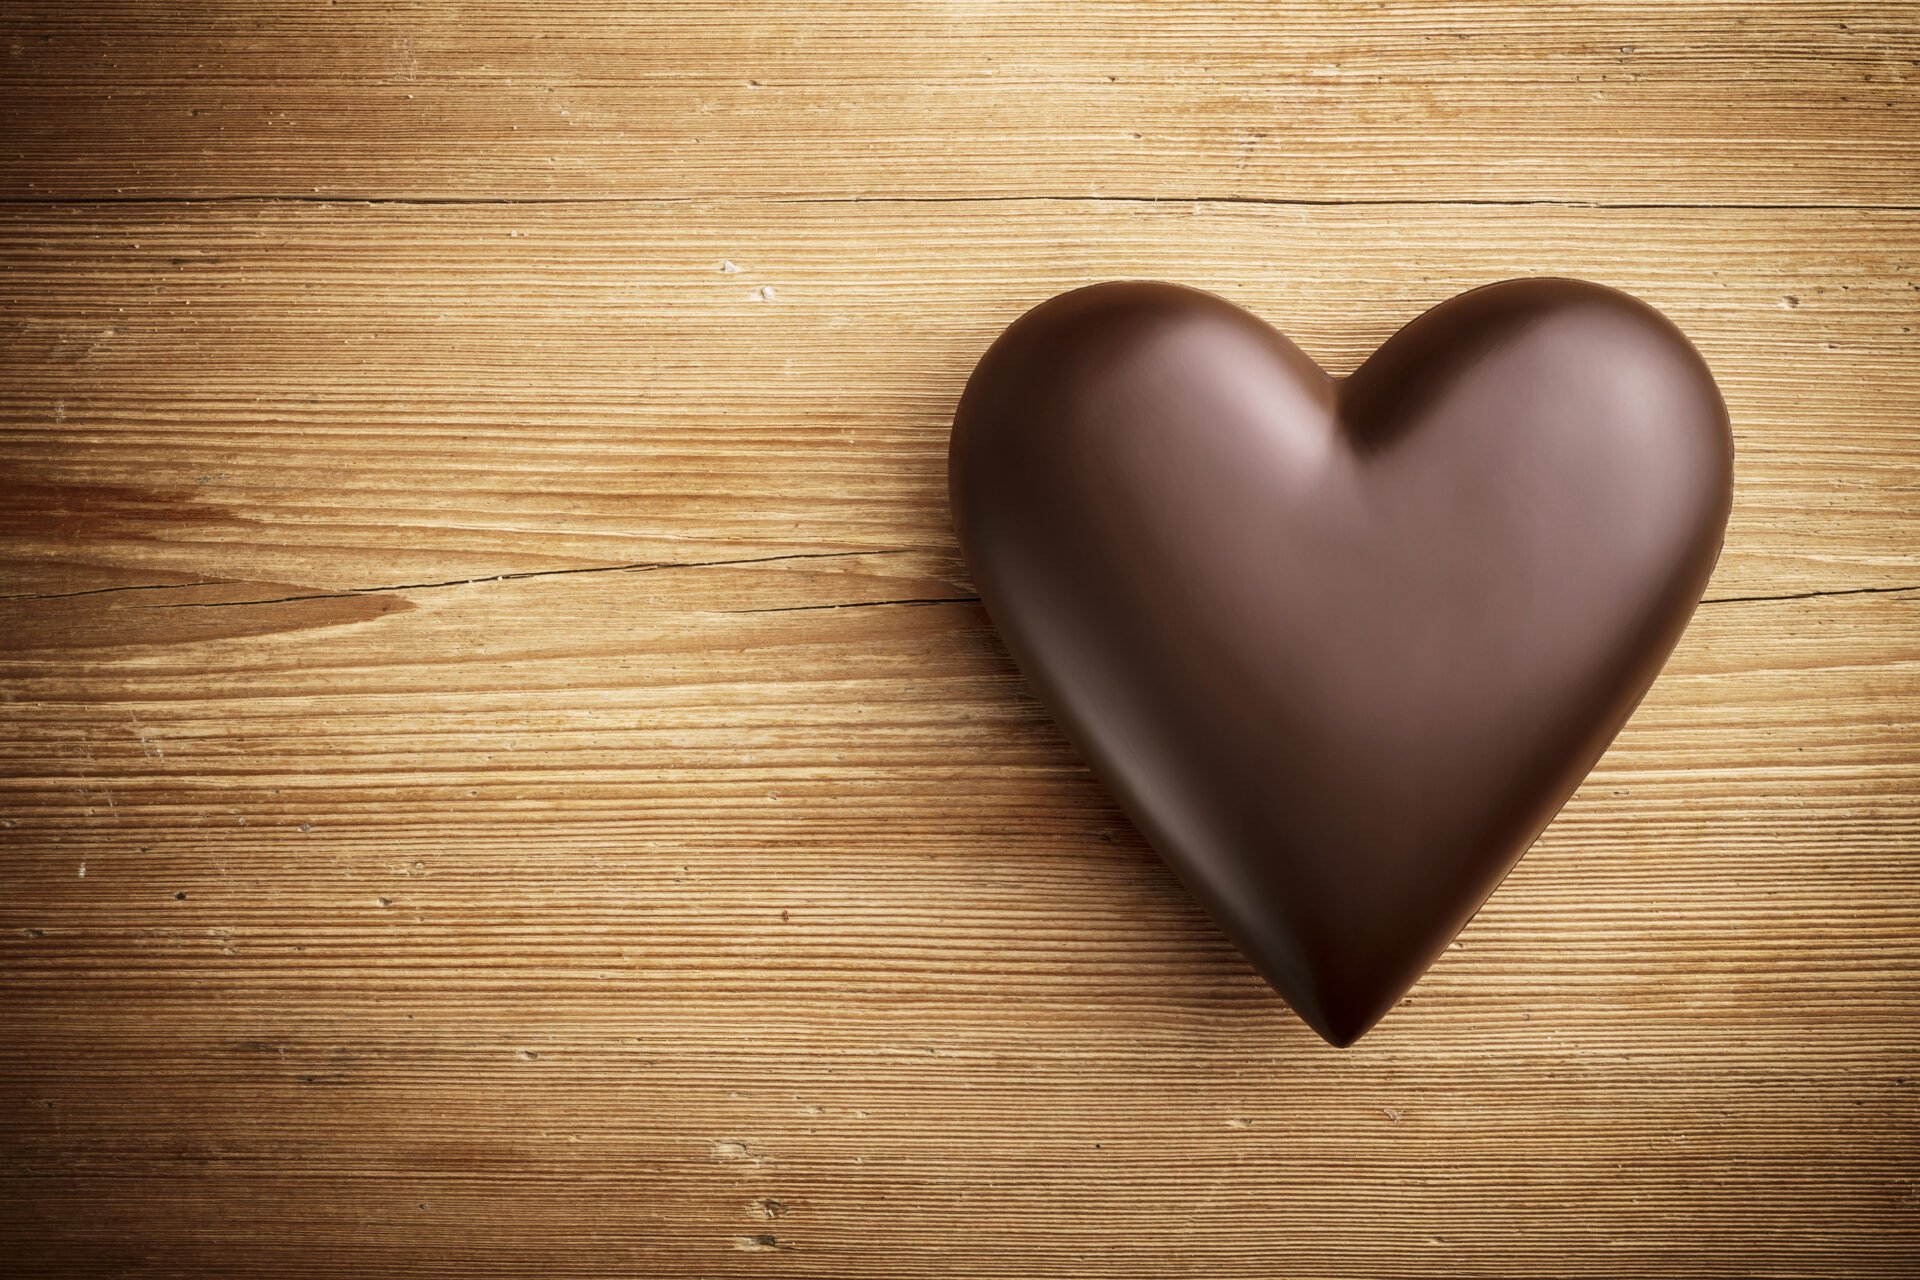 Chocolate heart on wooden background